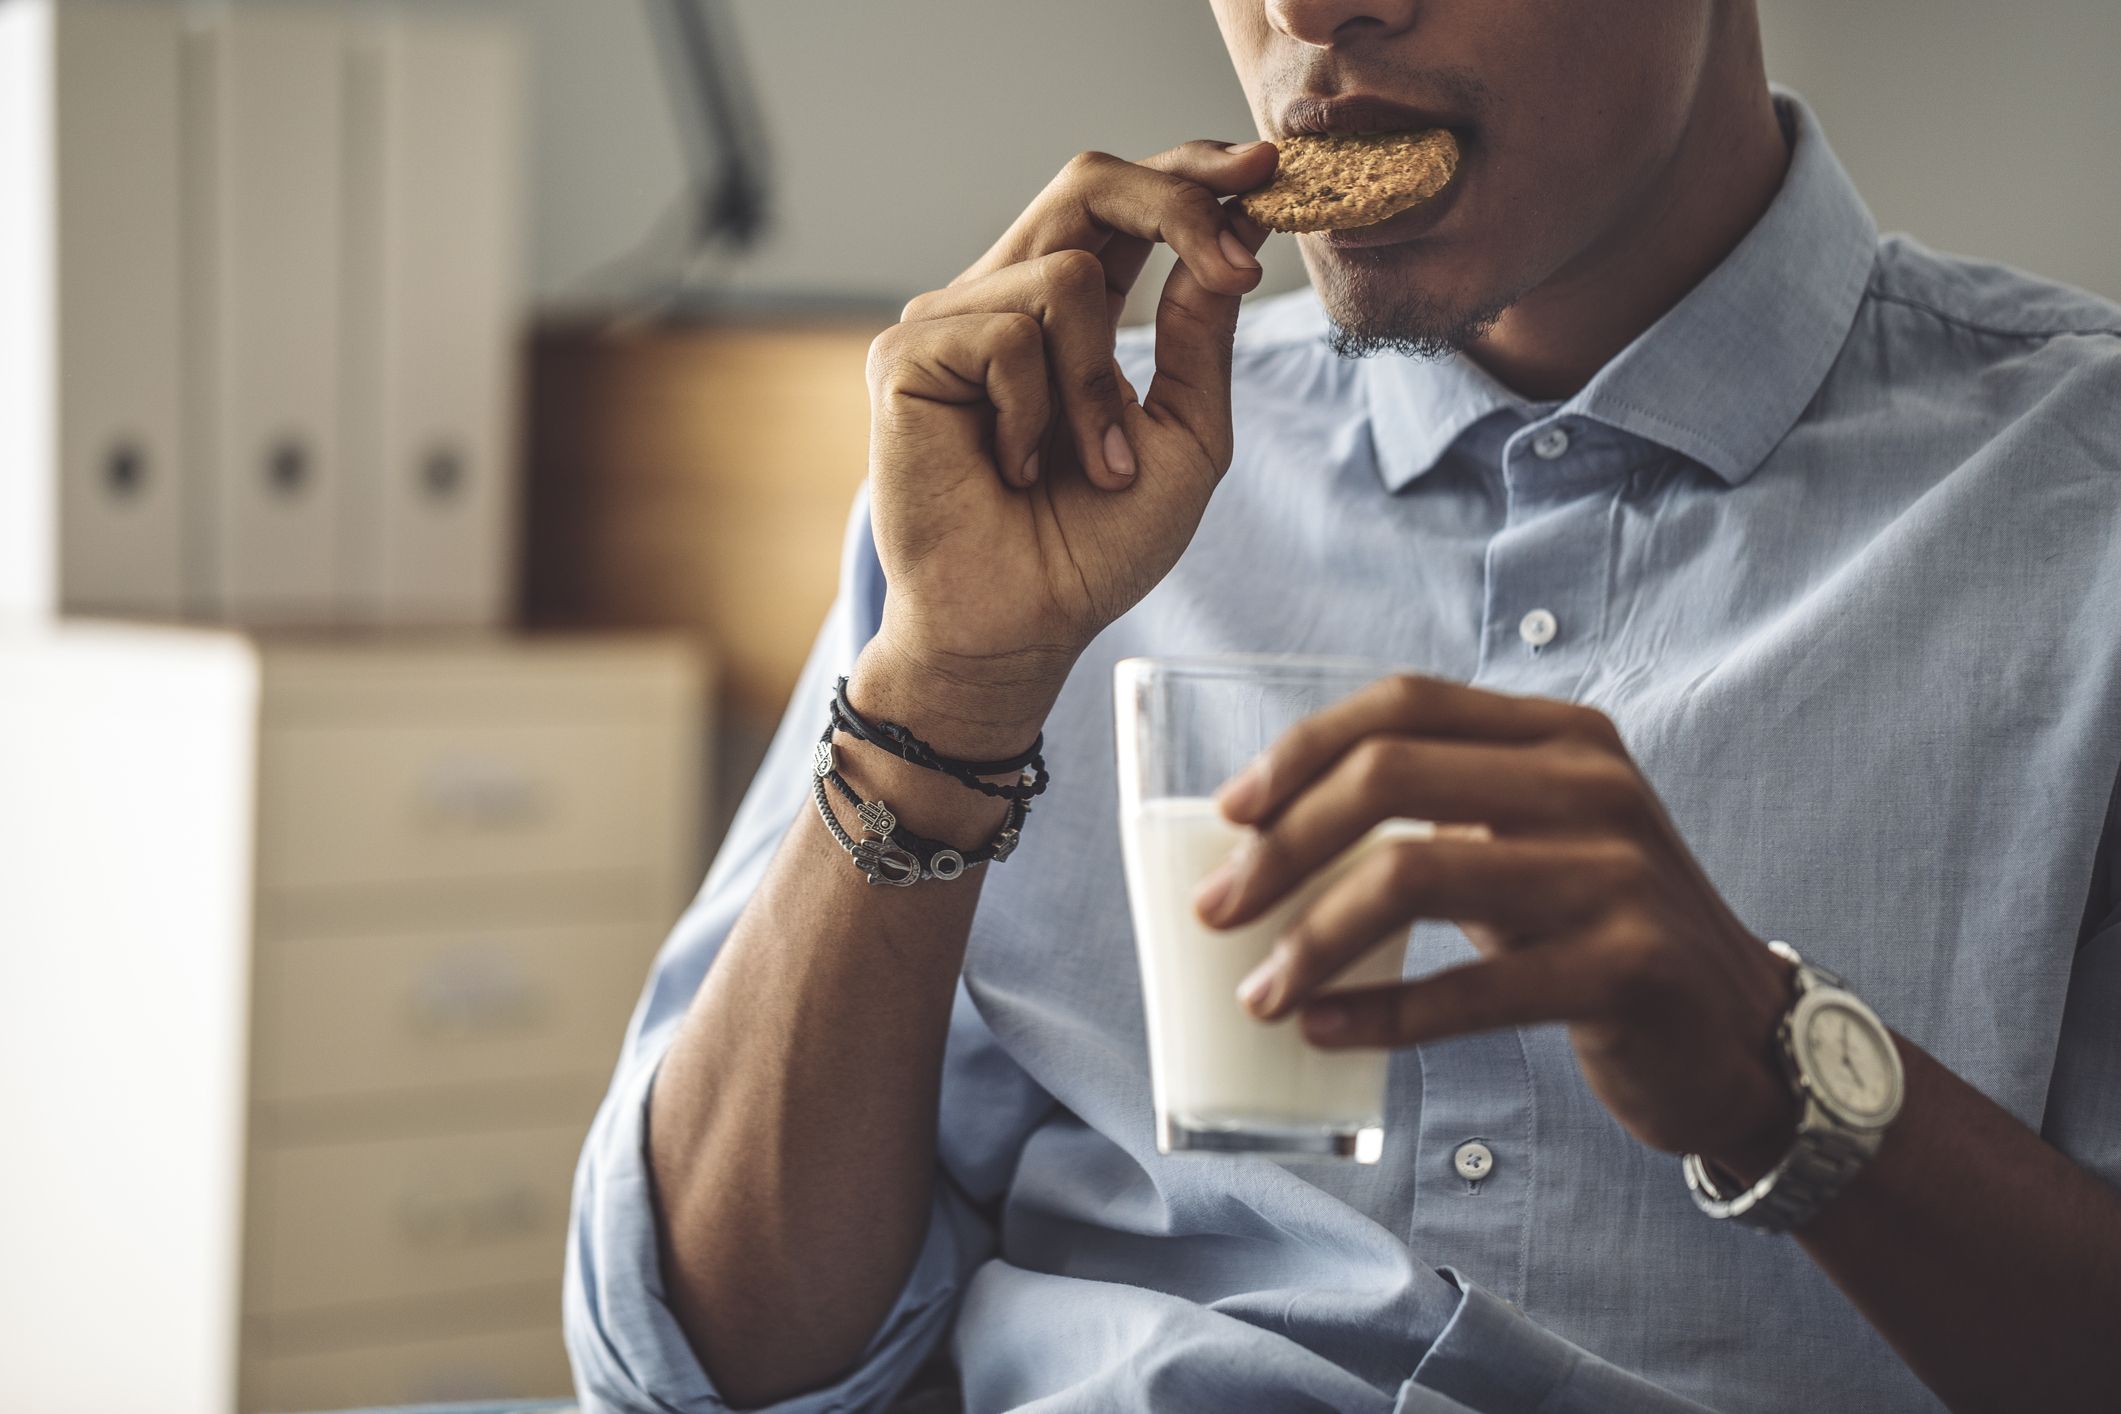 A man is eating a cookie and holding a glass of milk in his left hand